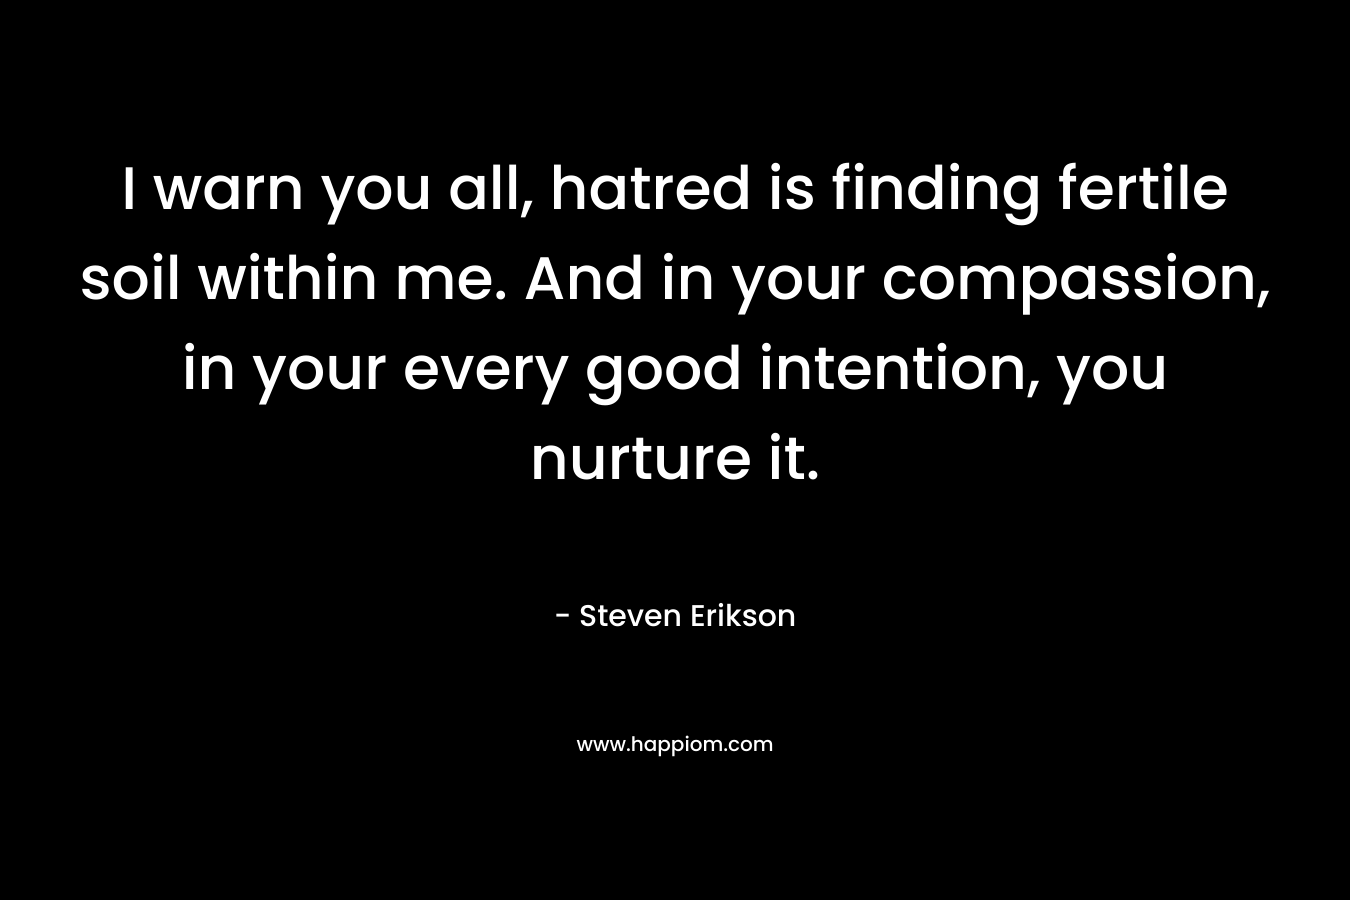 I warn you all, hatred is finding fertile soil within me. And in your compassion, in your every good intention, you nurture it.